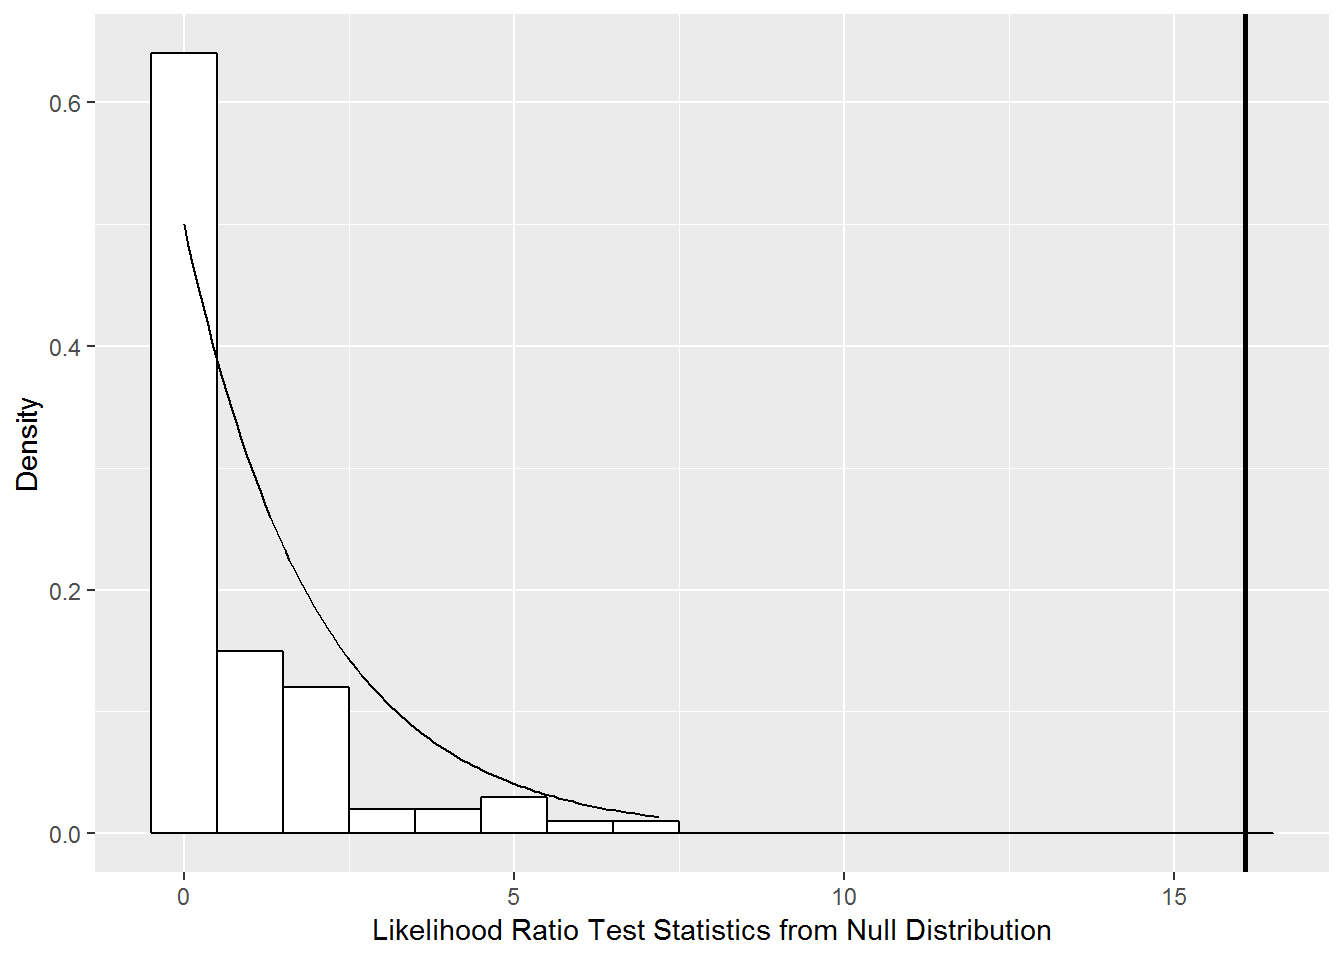 Null distribution of likelihood ratio test statistic comparing Models A and A.0 derived using parametric bootstrap with 100 samples (histogram) compared to a chi-square distribution with 2 degrees of freedom (smooth curve).